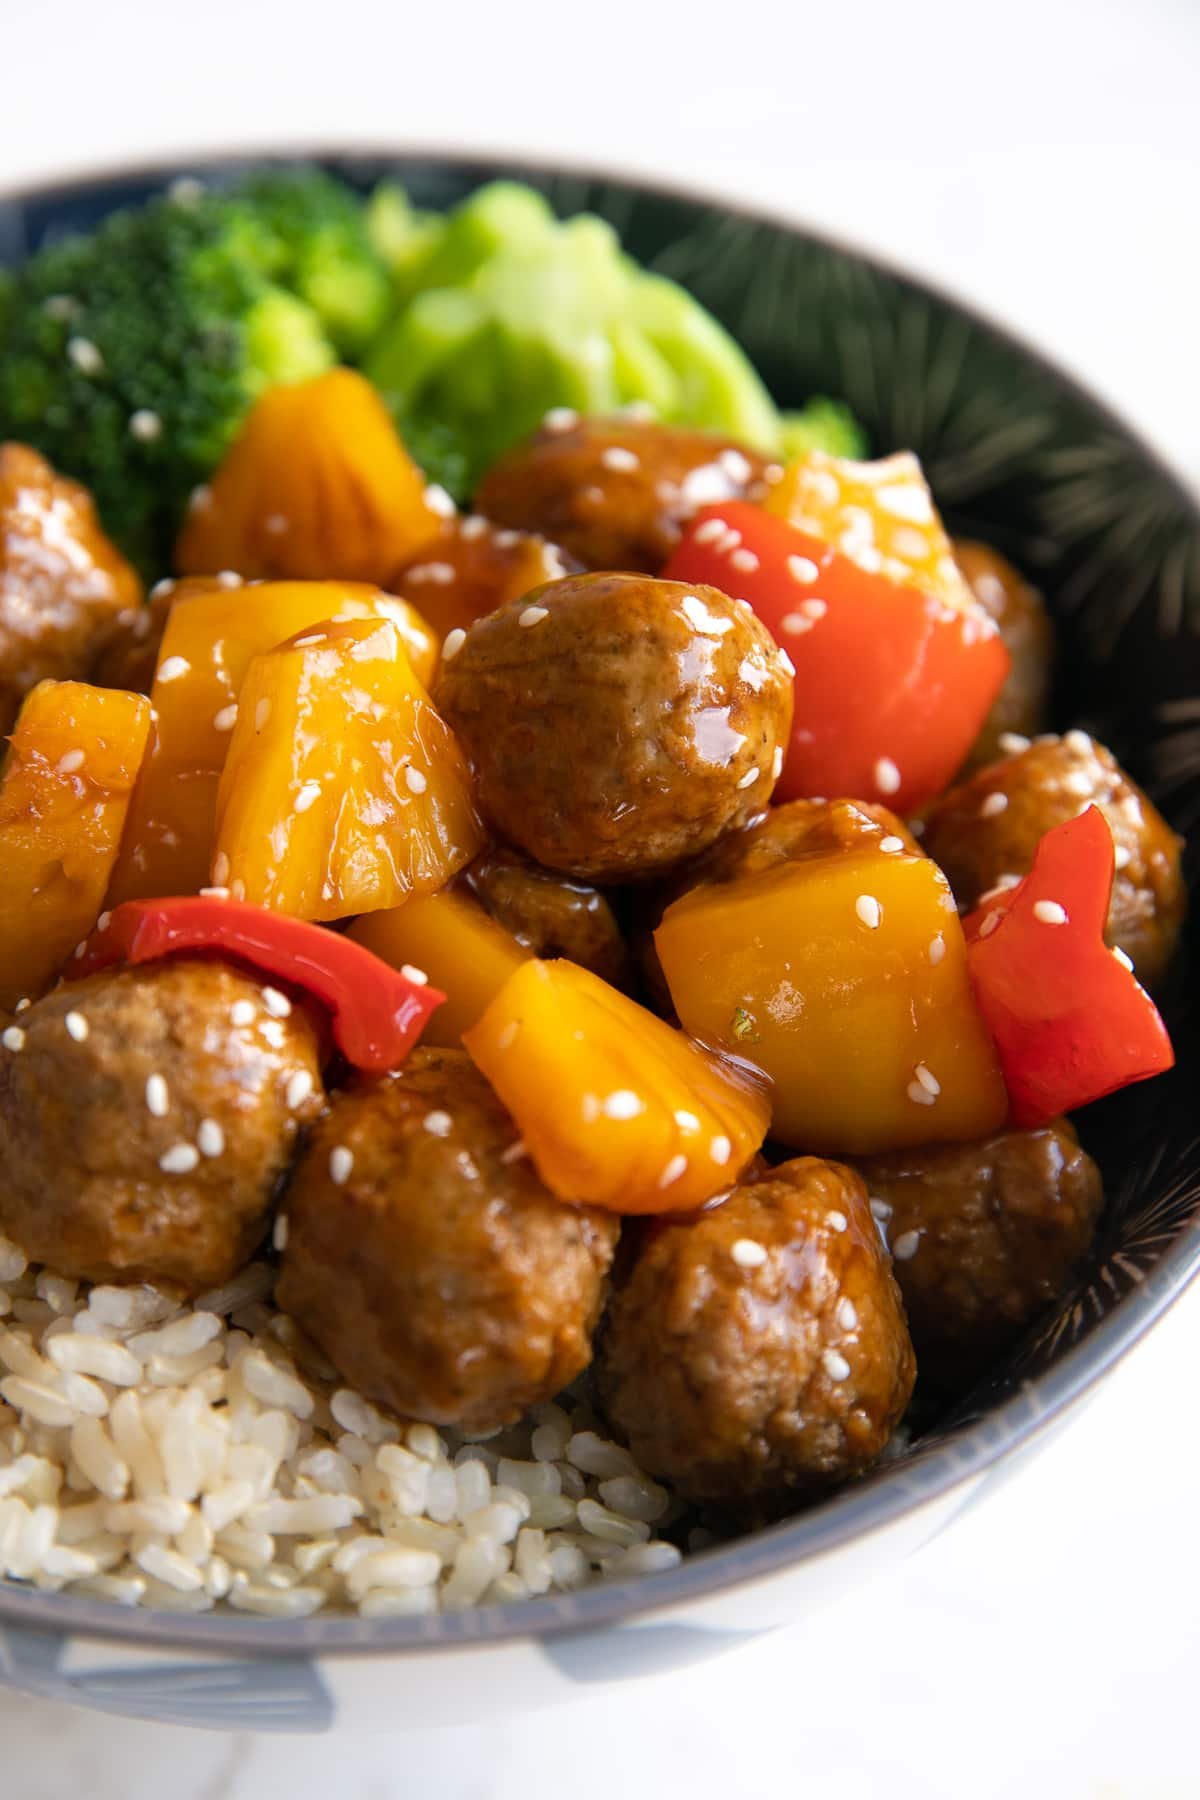 One bowl filled with brown rice topped with sweet and sour meatballs and broccoli sprinkled with white sesame seeds.